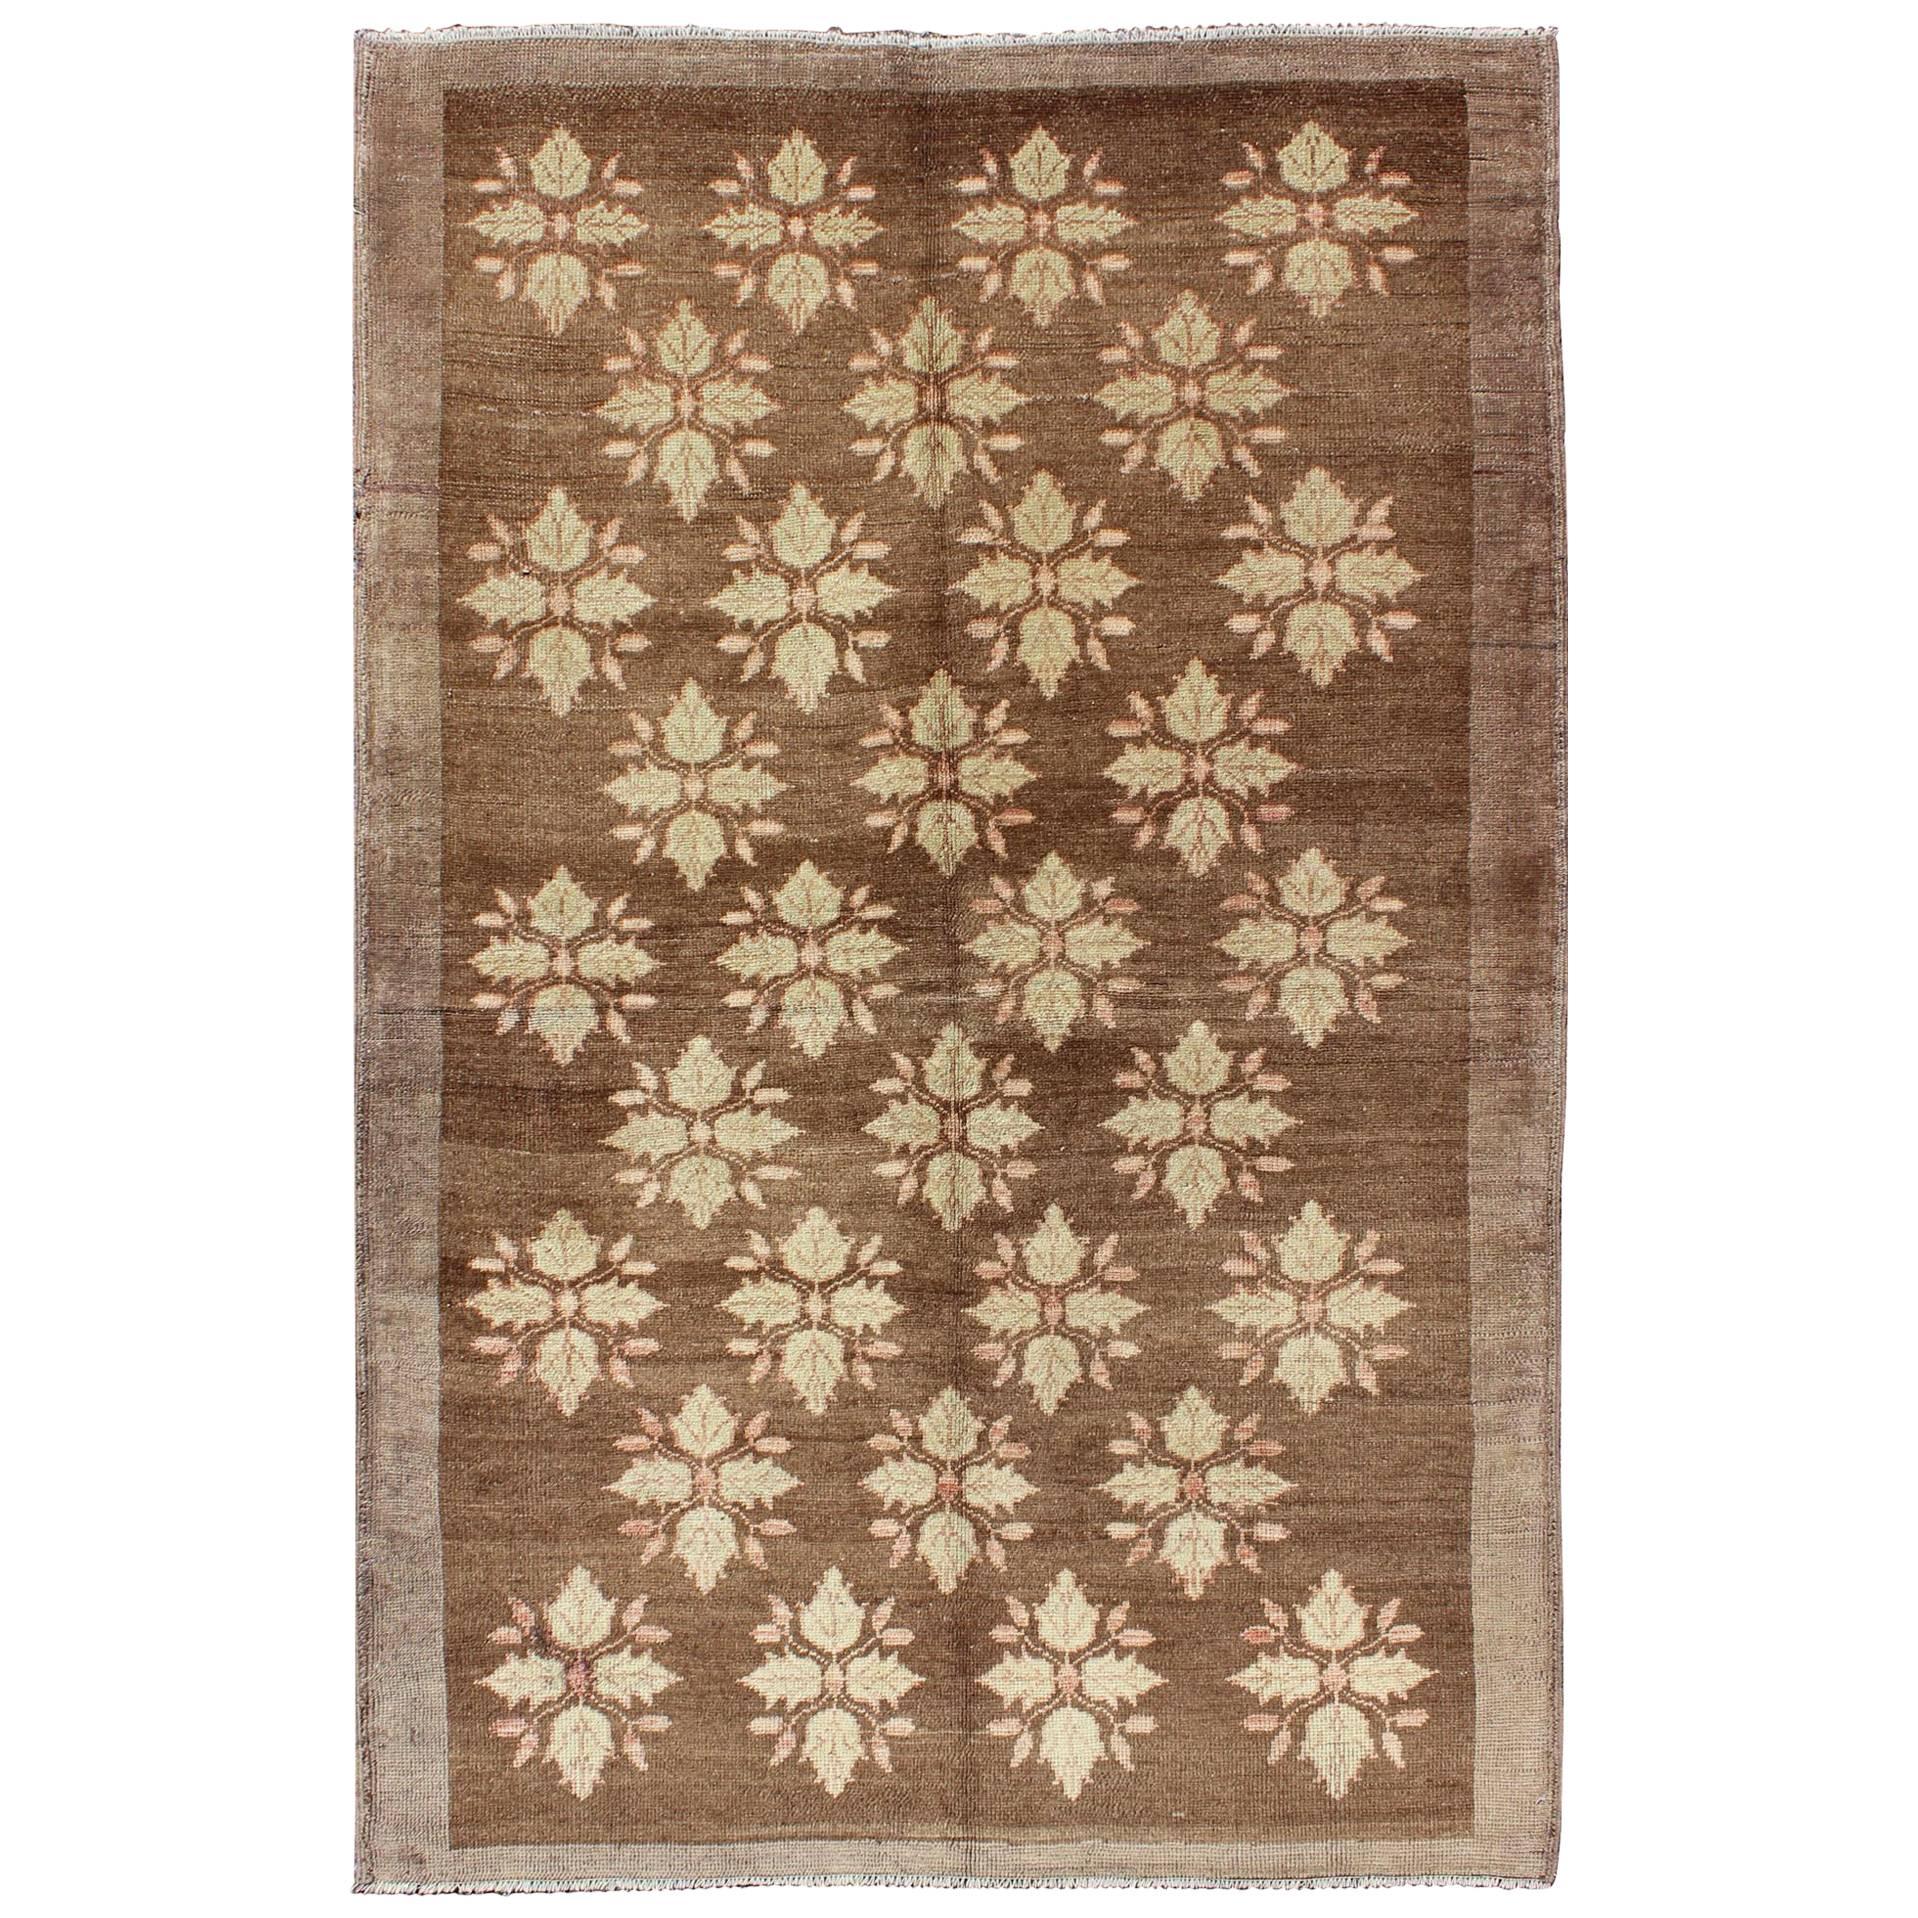 Midcentury Turkish Tulu Rug with Mini Blossom Medallions in Brown and Ivory